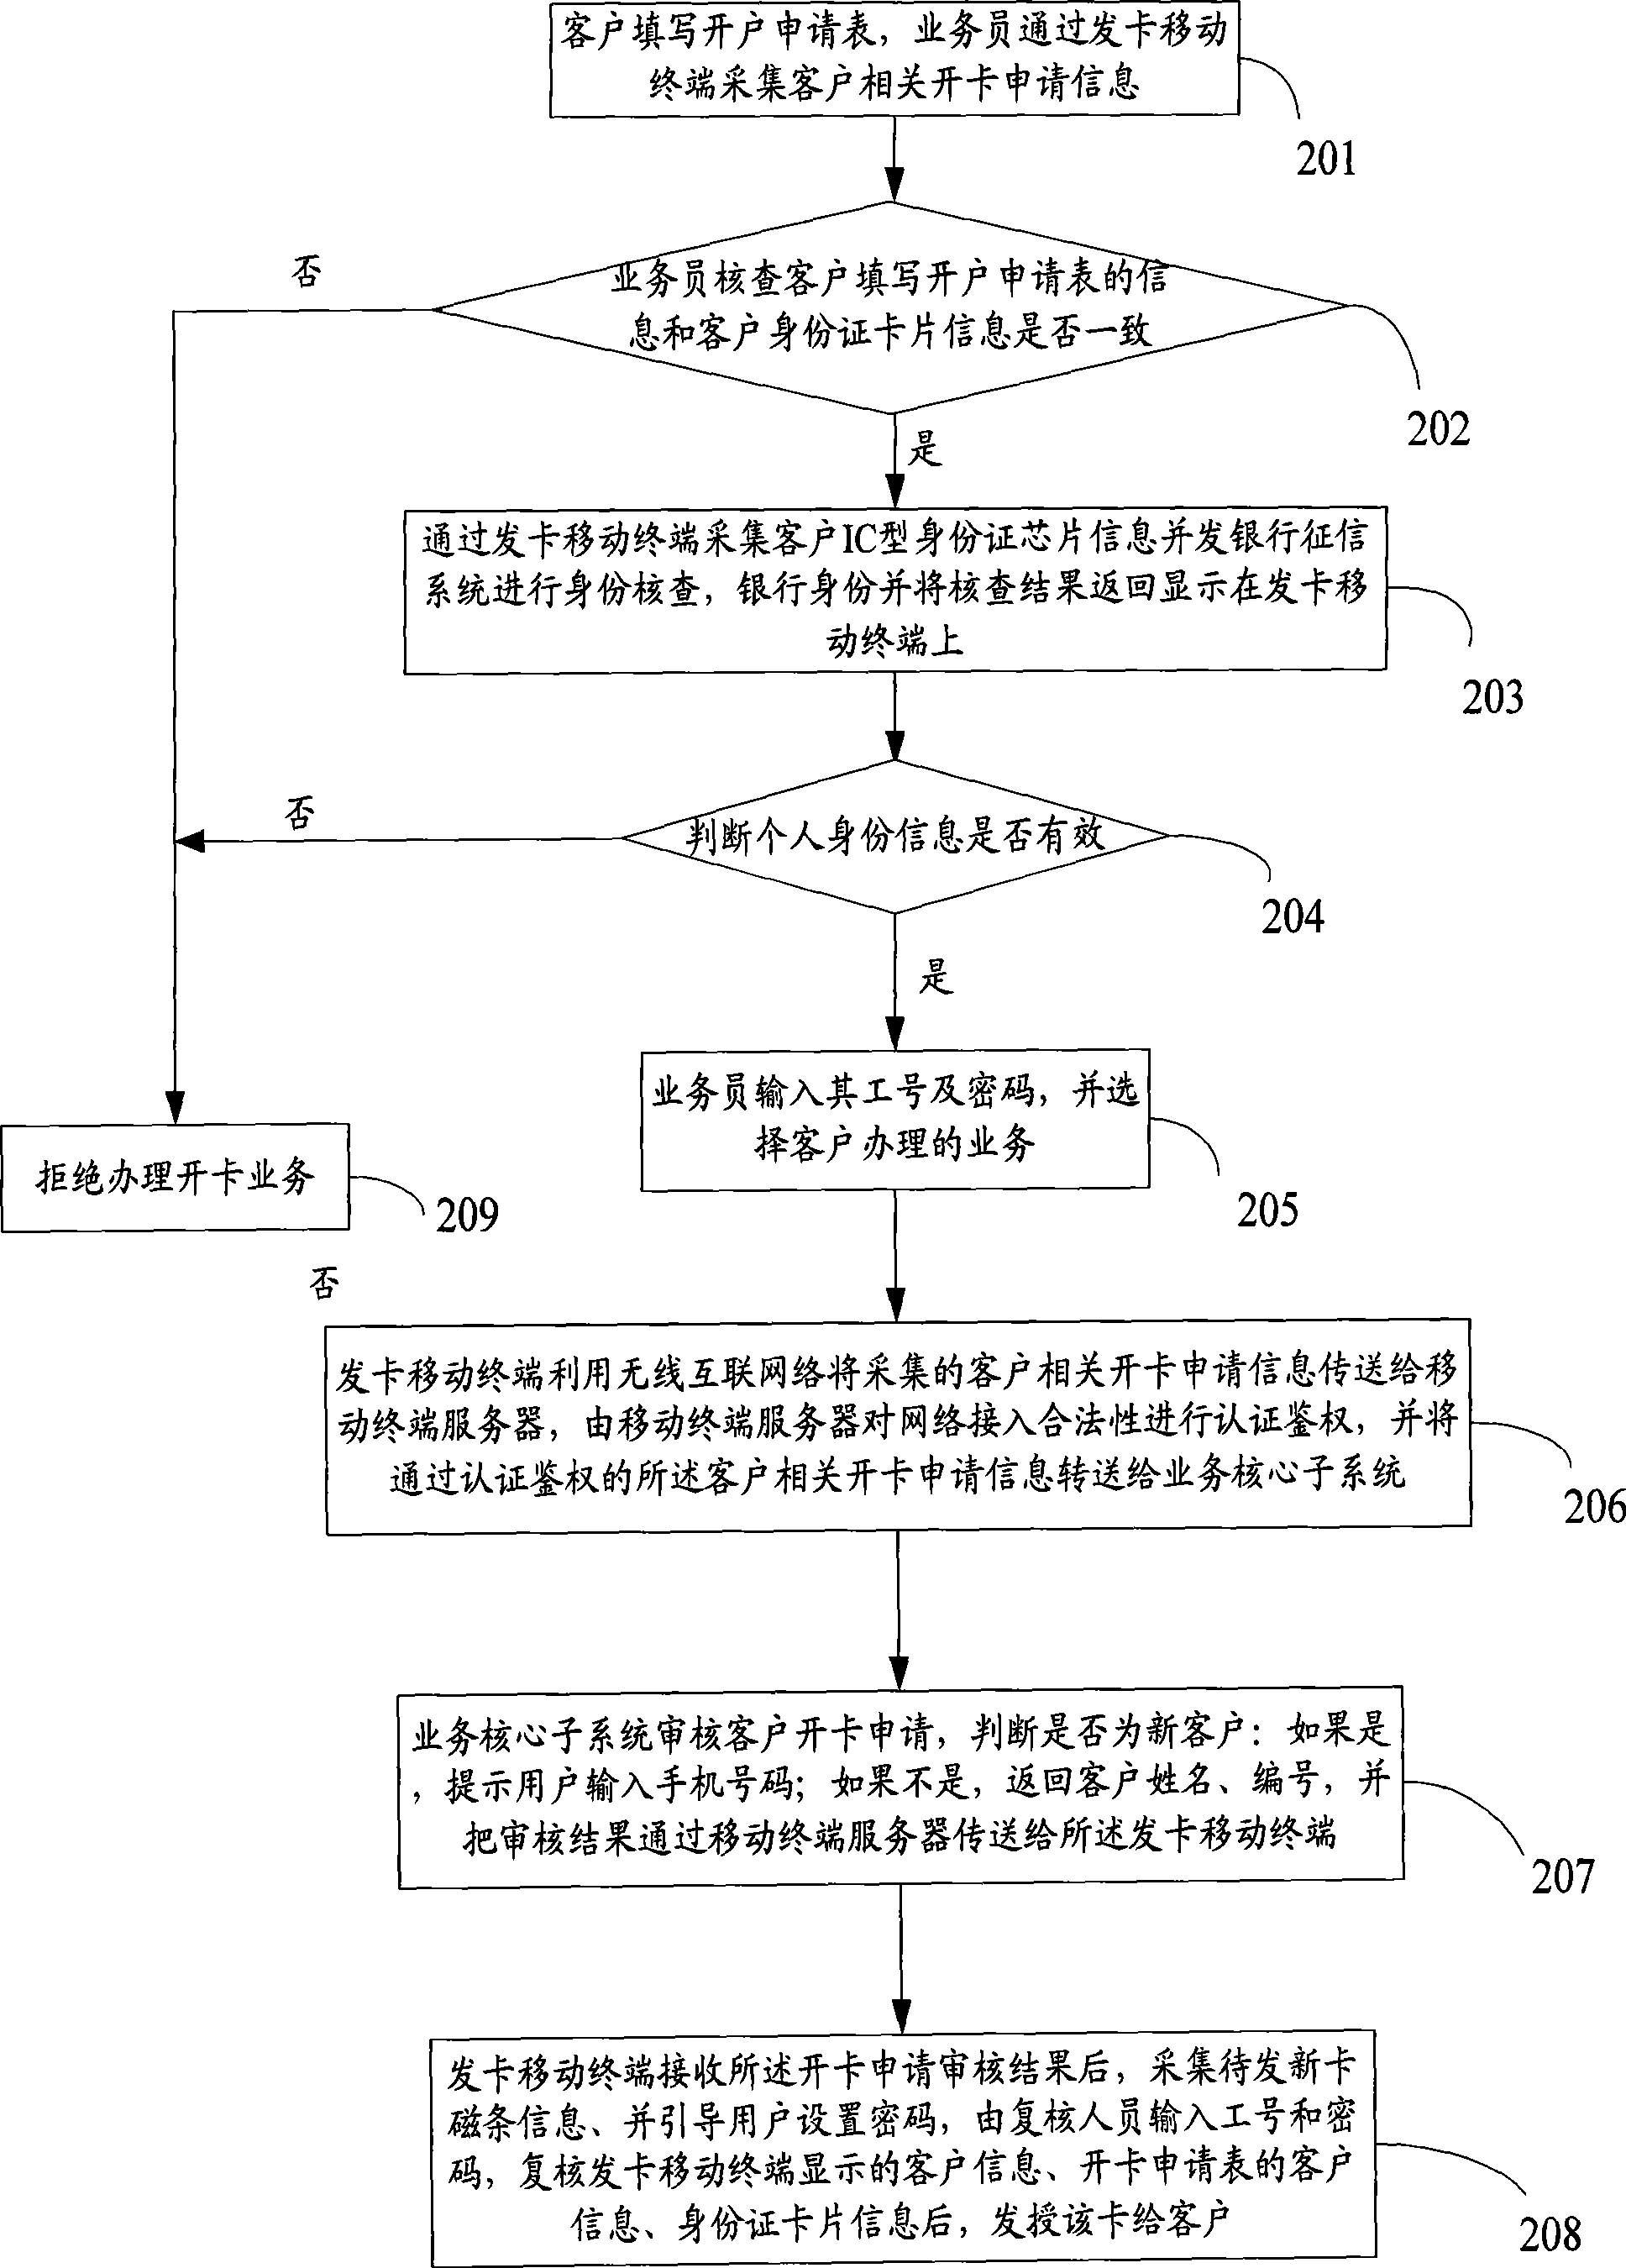 Method and system for card distribution through mobile terminal